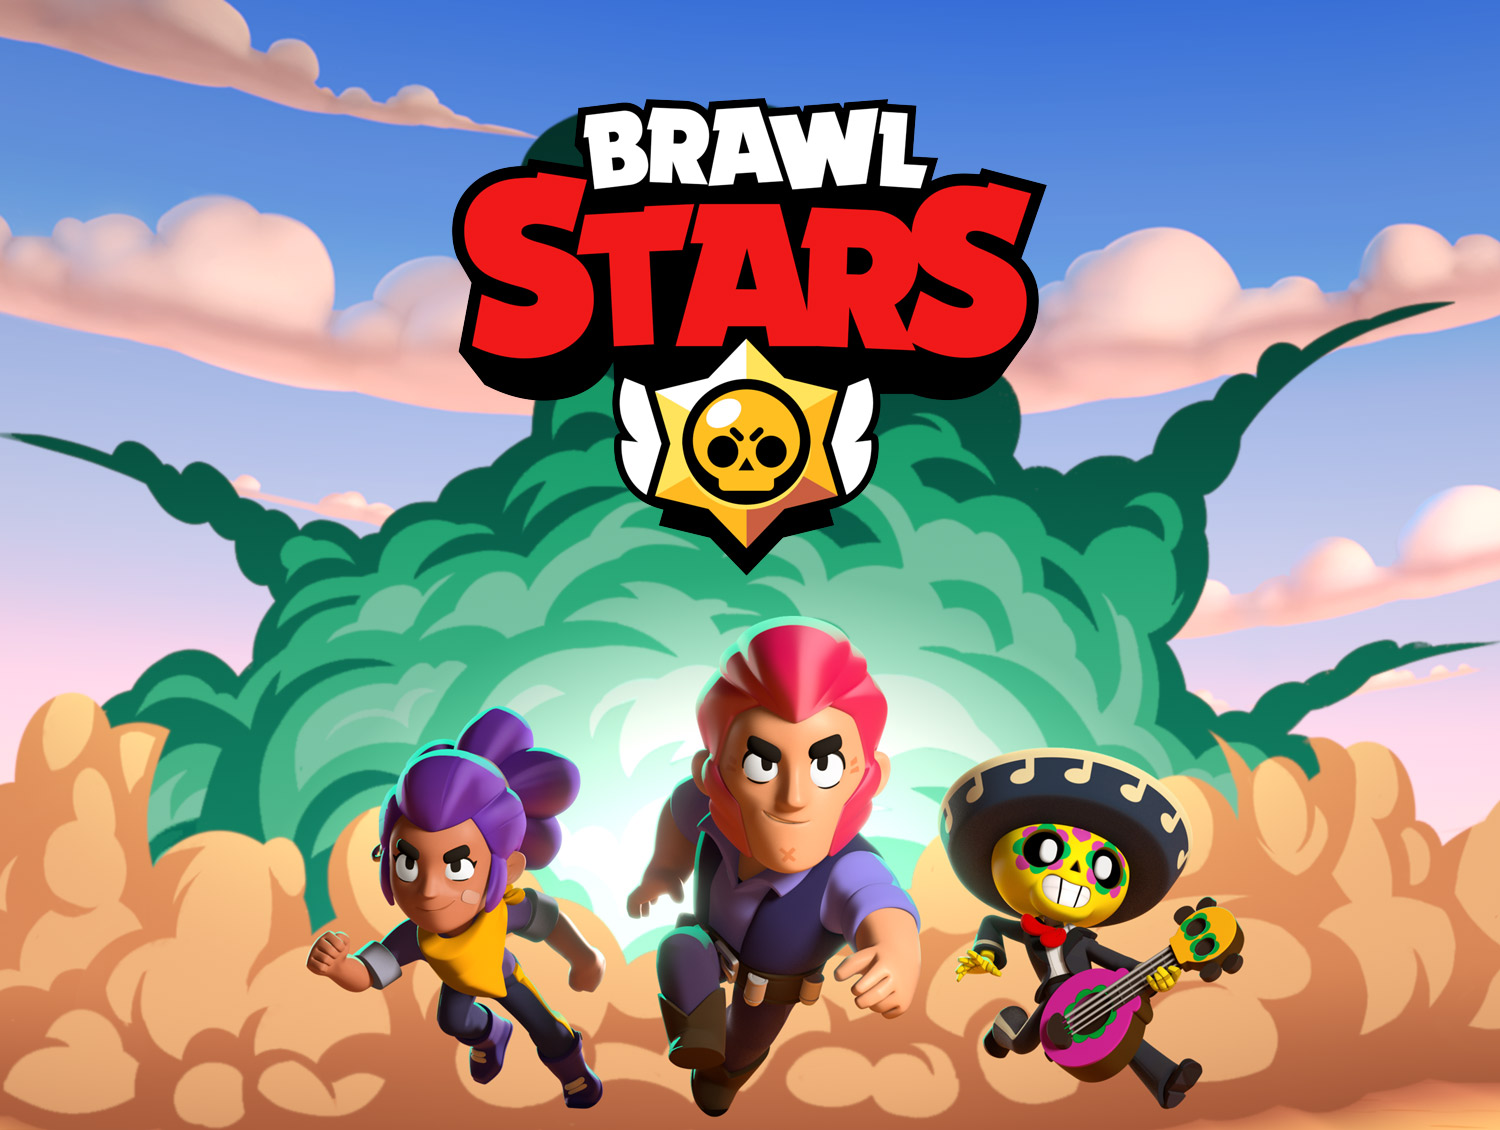 Download brawl stars on pc cool things to download on pc